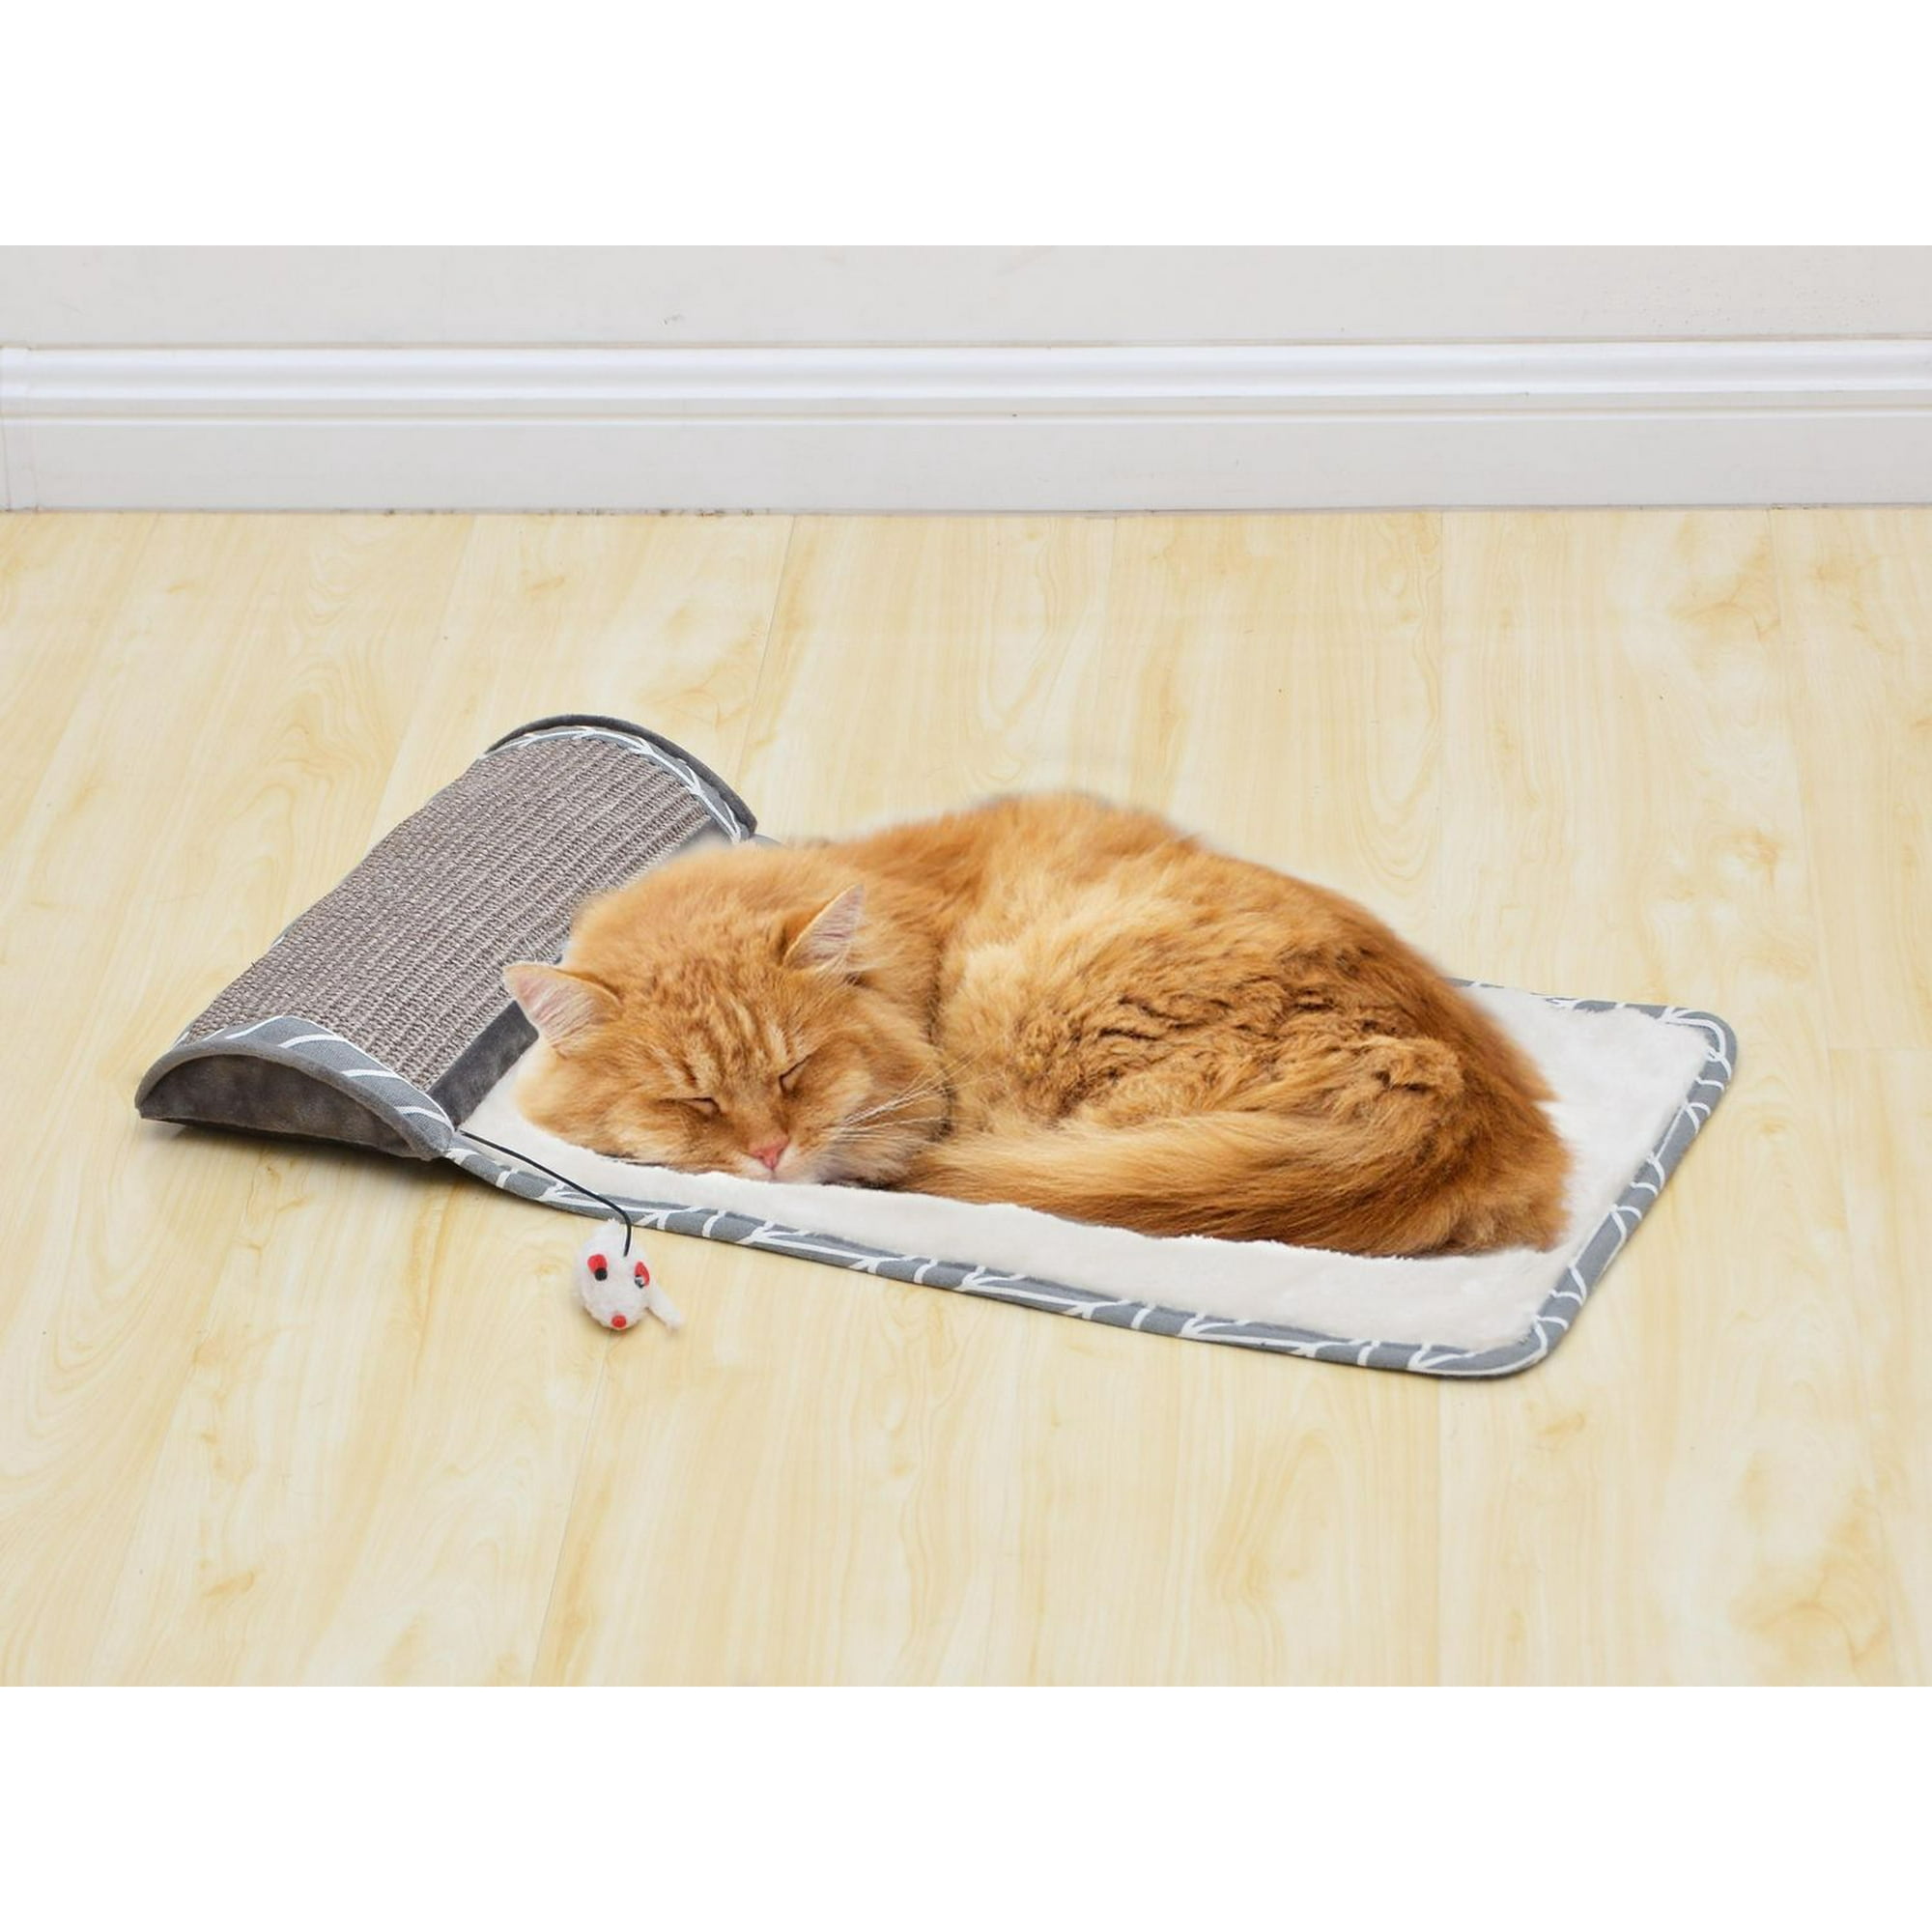 Catry 2-In-1 Pet Blanket and Pillow with Teasing Toy 